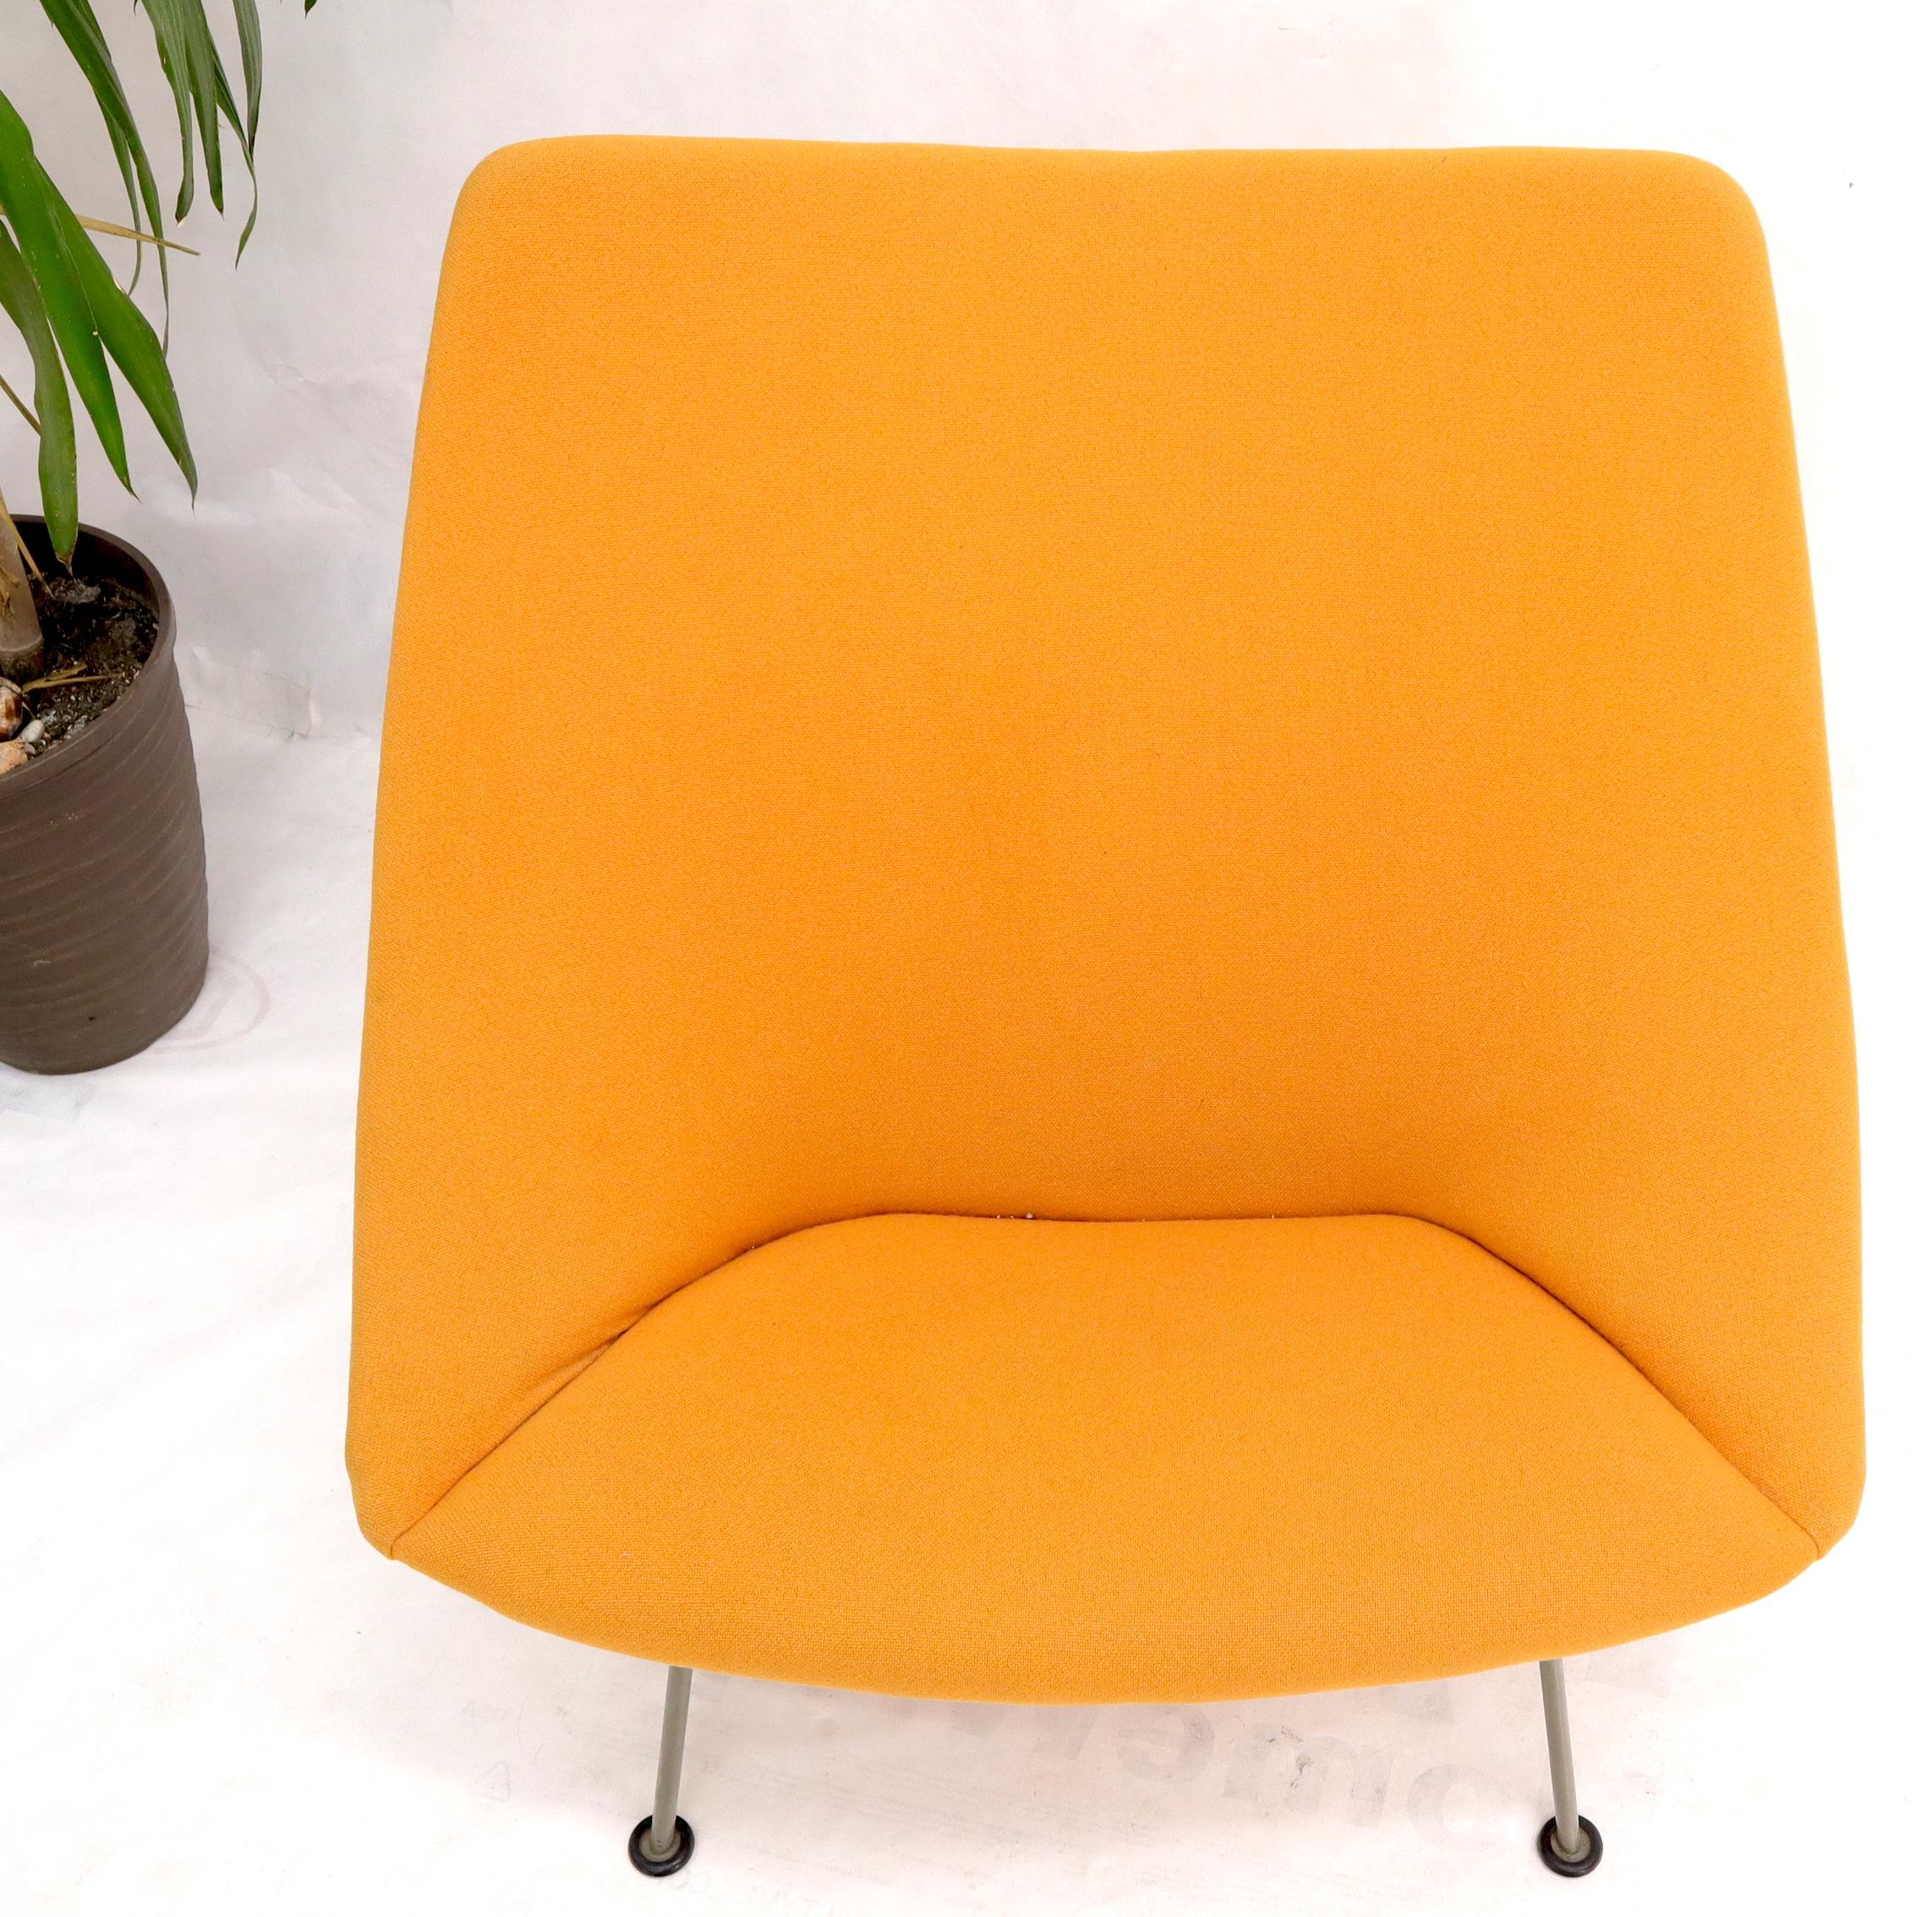 20th Century Pierre Paulin Artifort Wool Upholstery Oyster Chair Orange Wool Upholstery For Sale